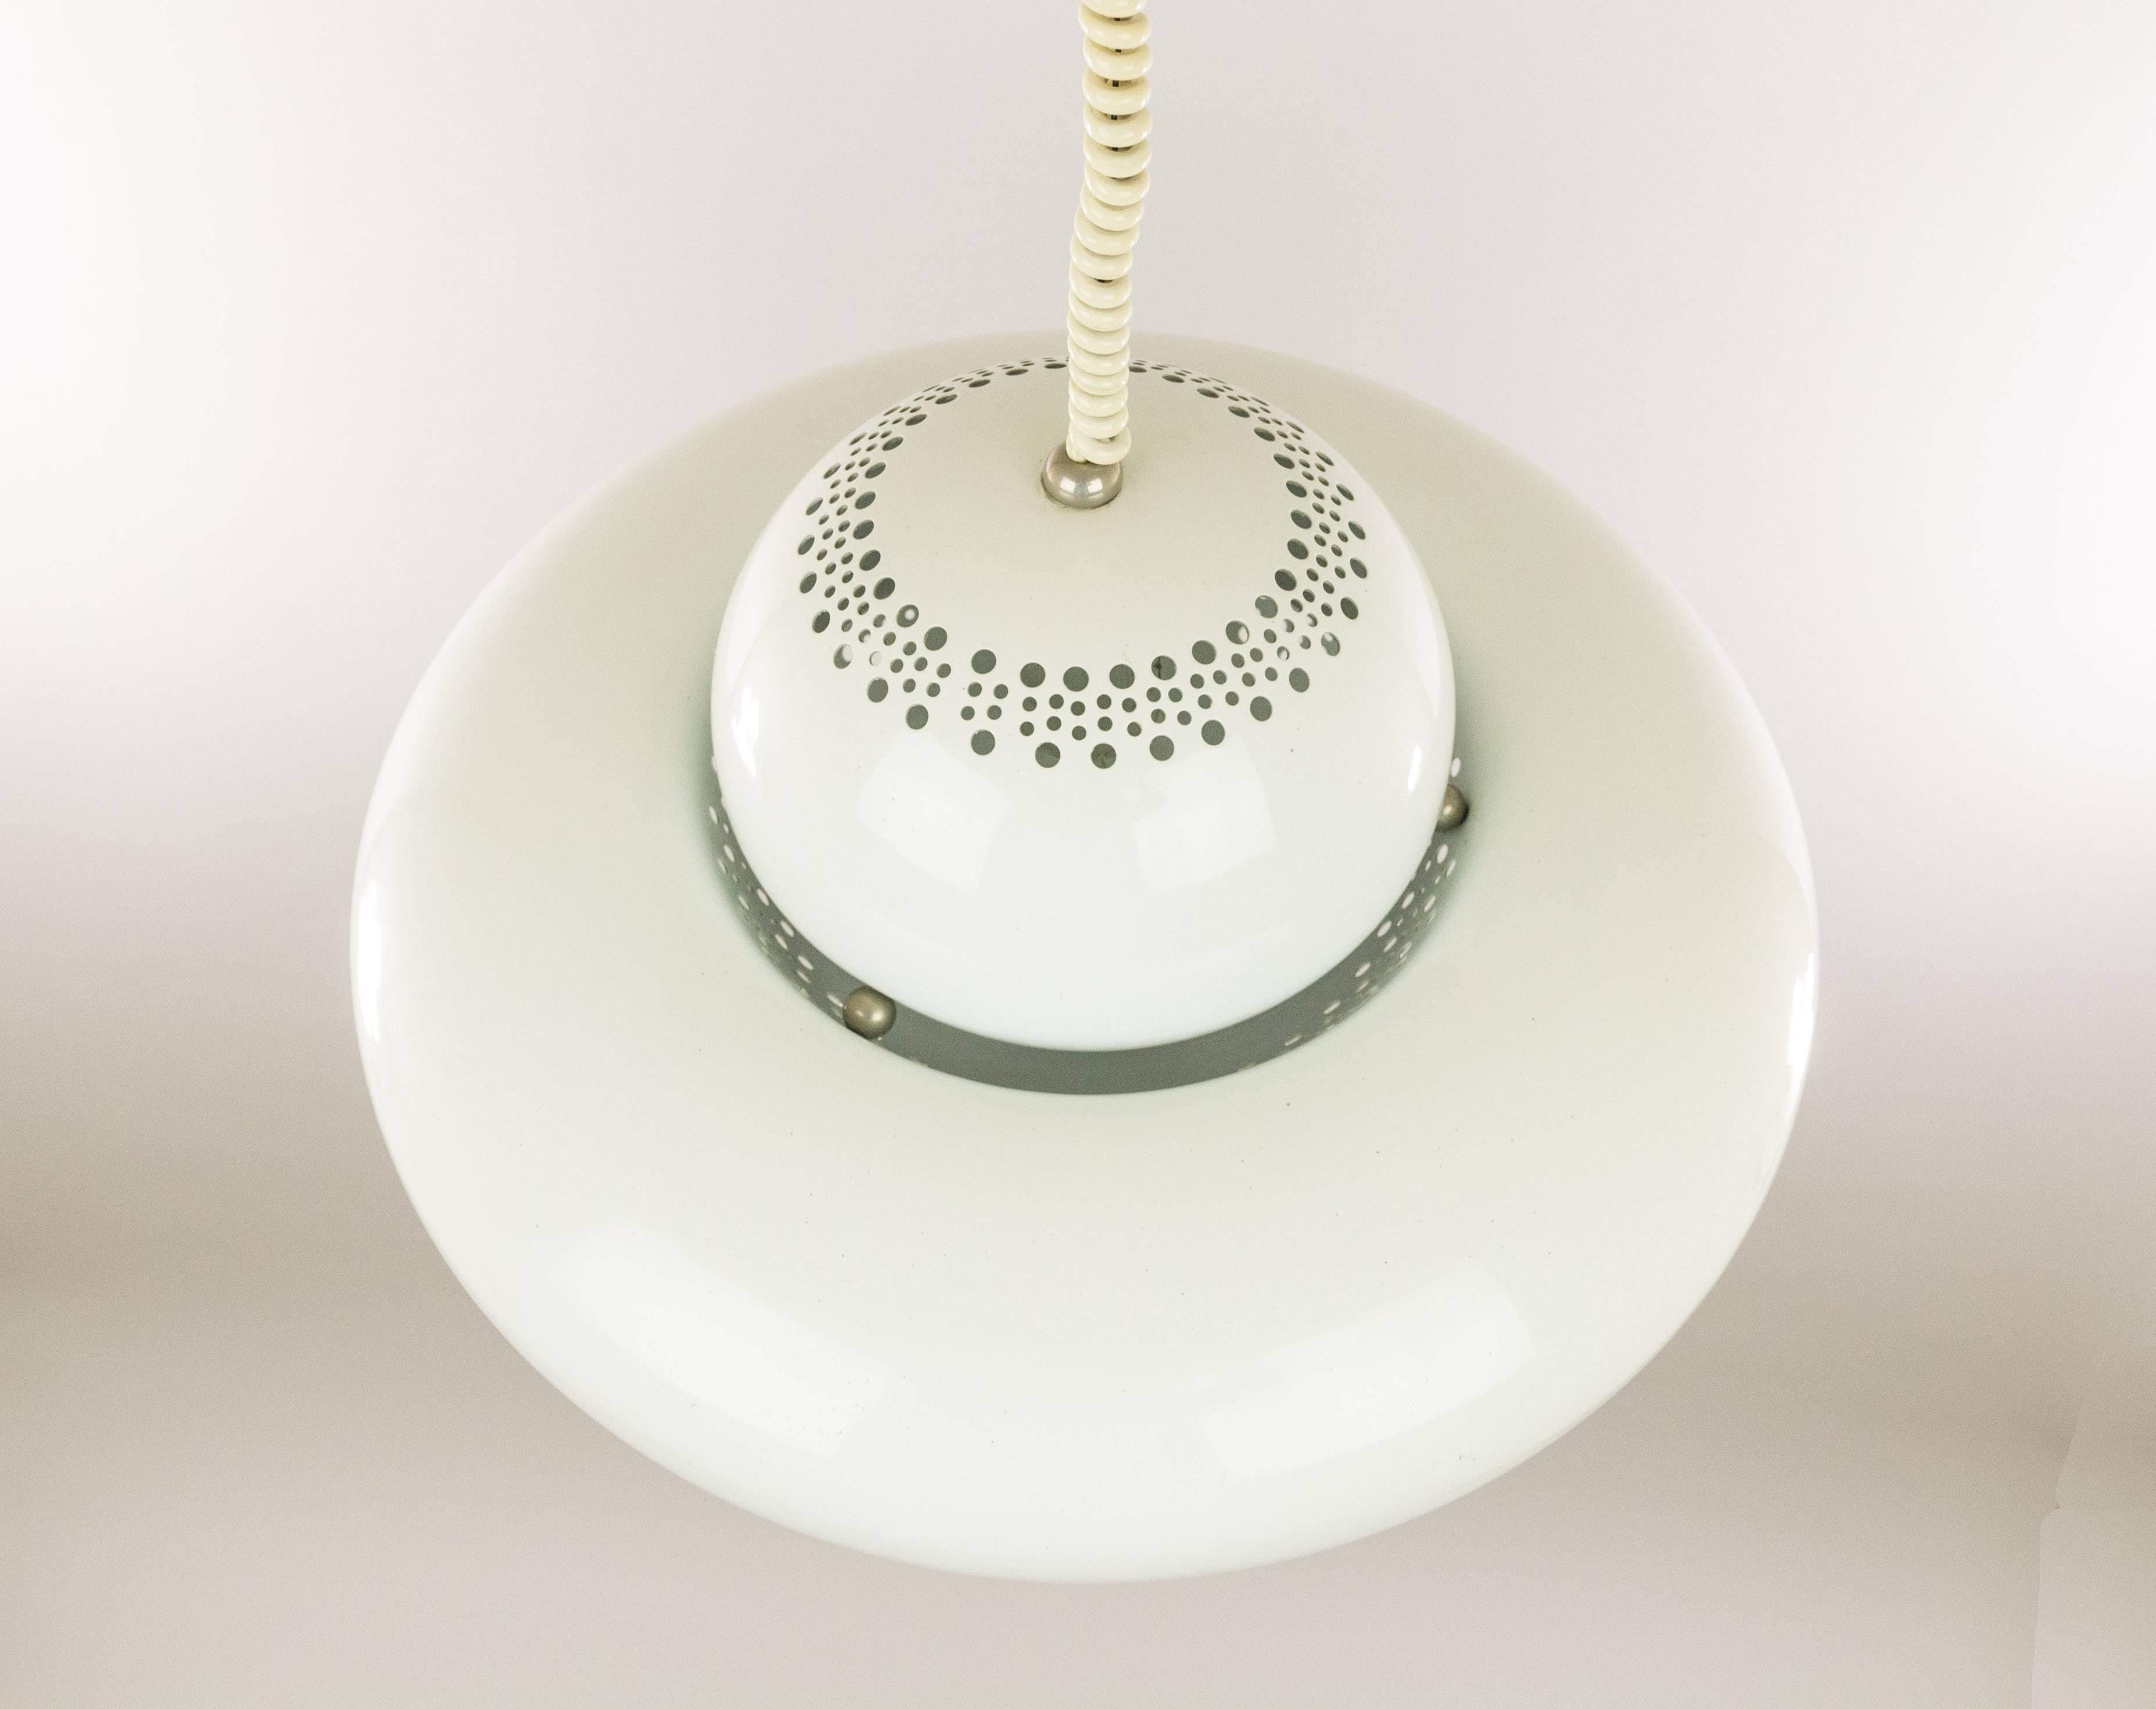 Mid-Century Modern White Fior di Loto Pendant by Tobia and Afra Scarpa for Flos, 1960s